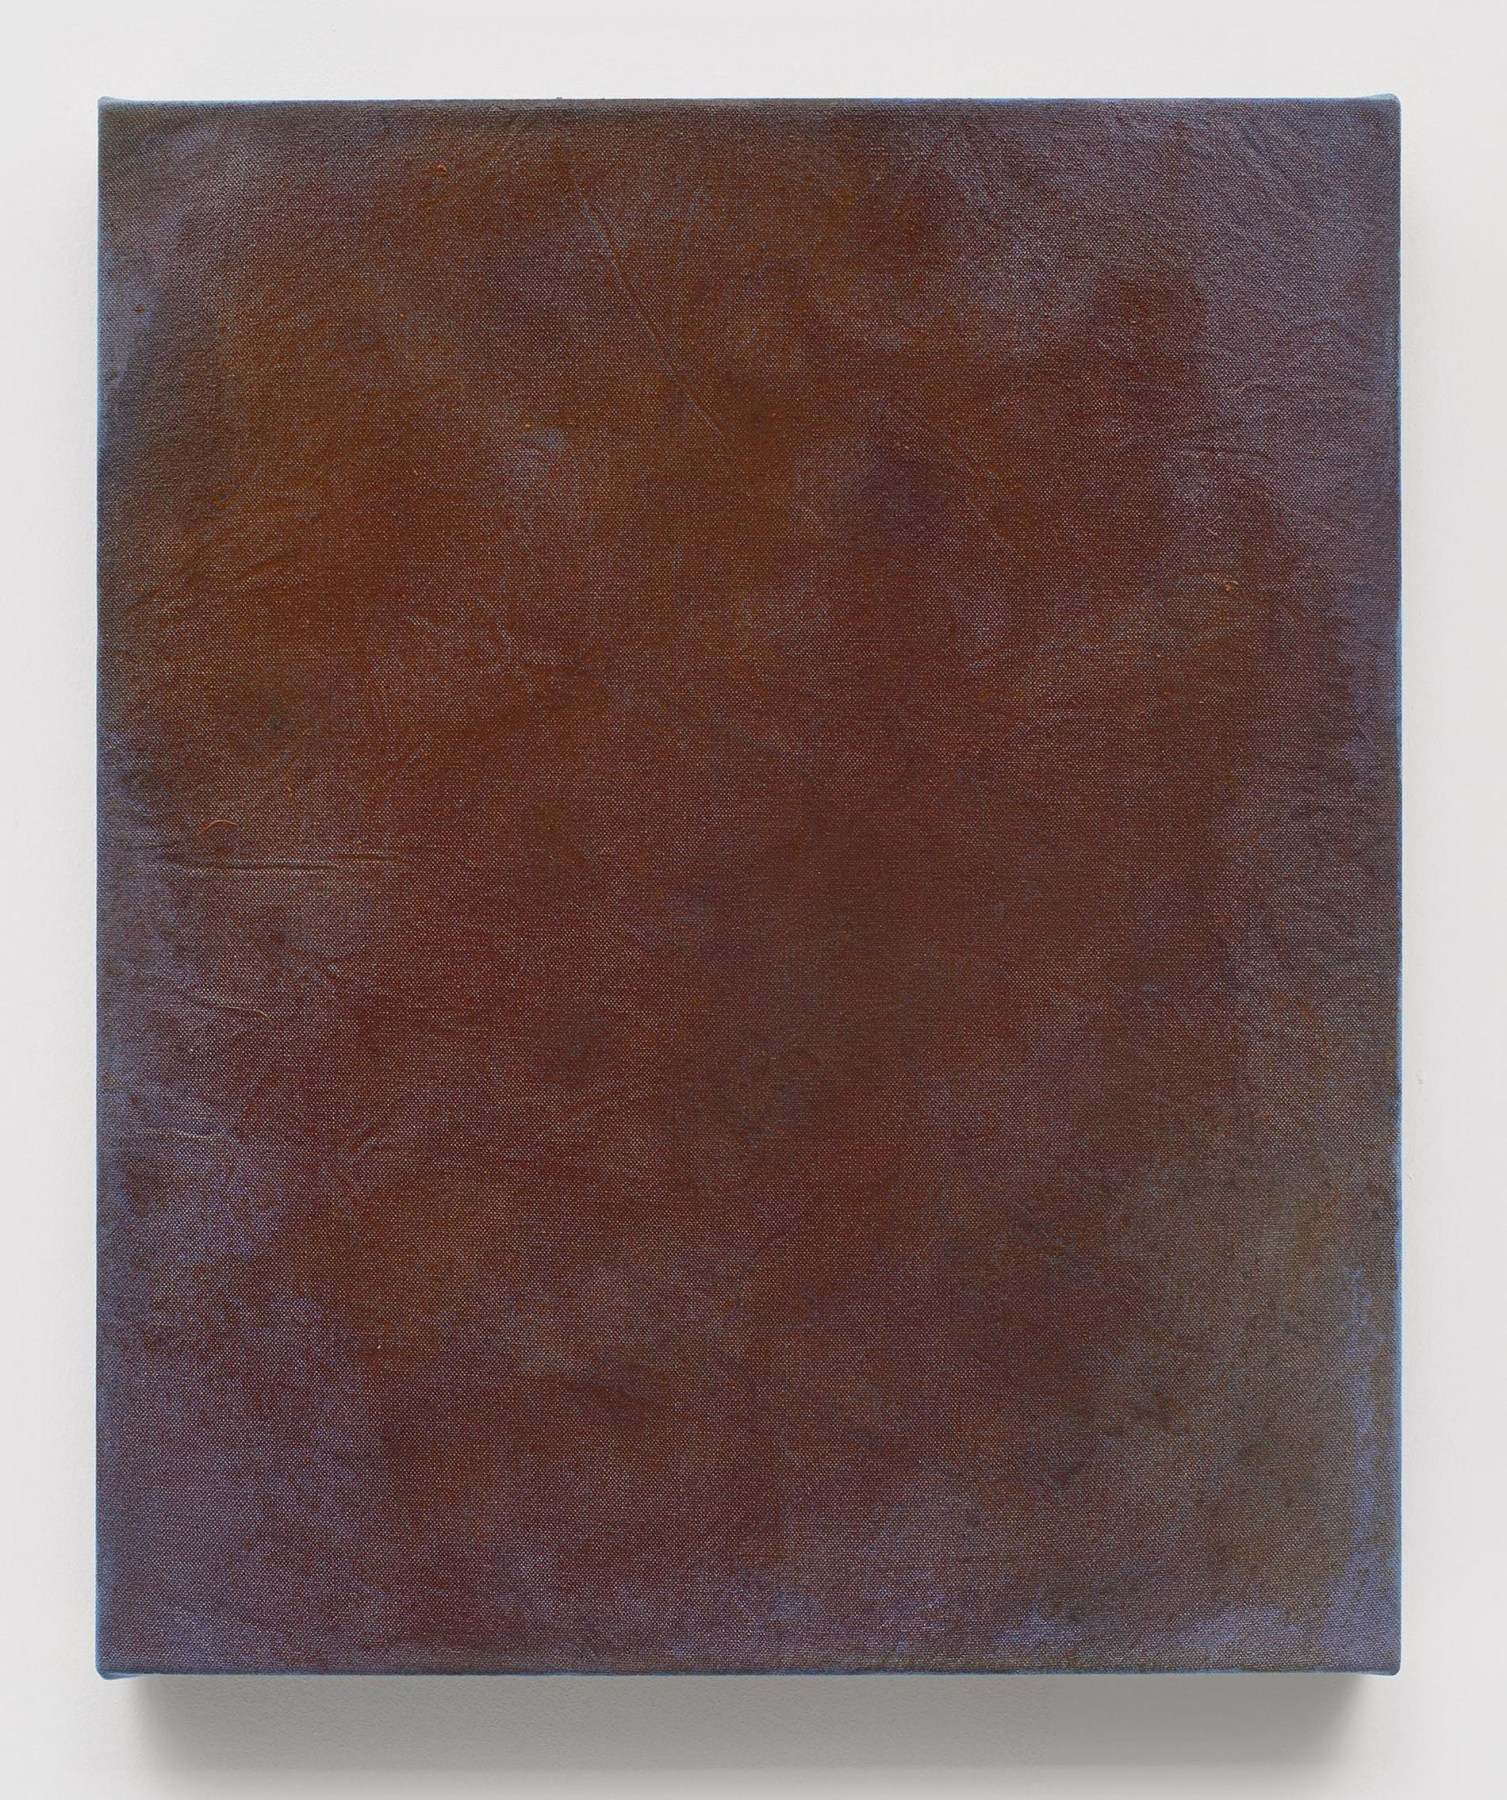 Abstract painting of a mixture of brown and purplish blue colors